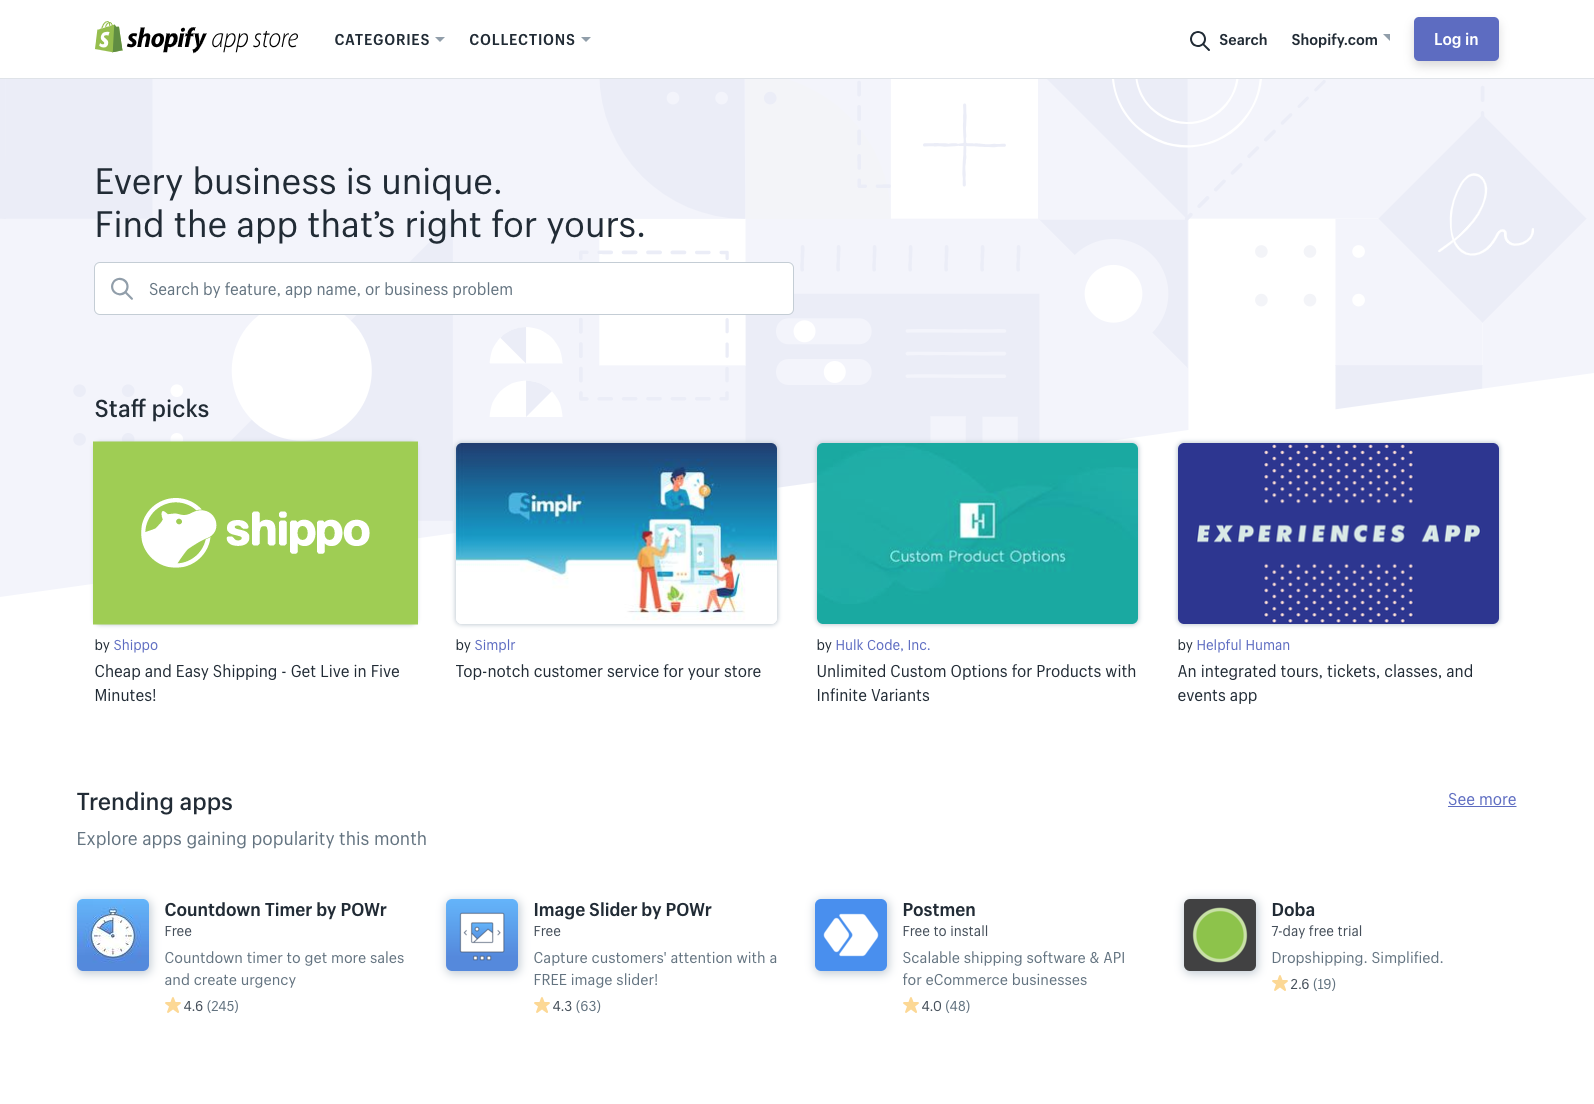 Optimize app listing for Shopify staff pick